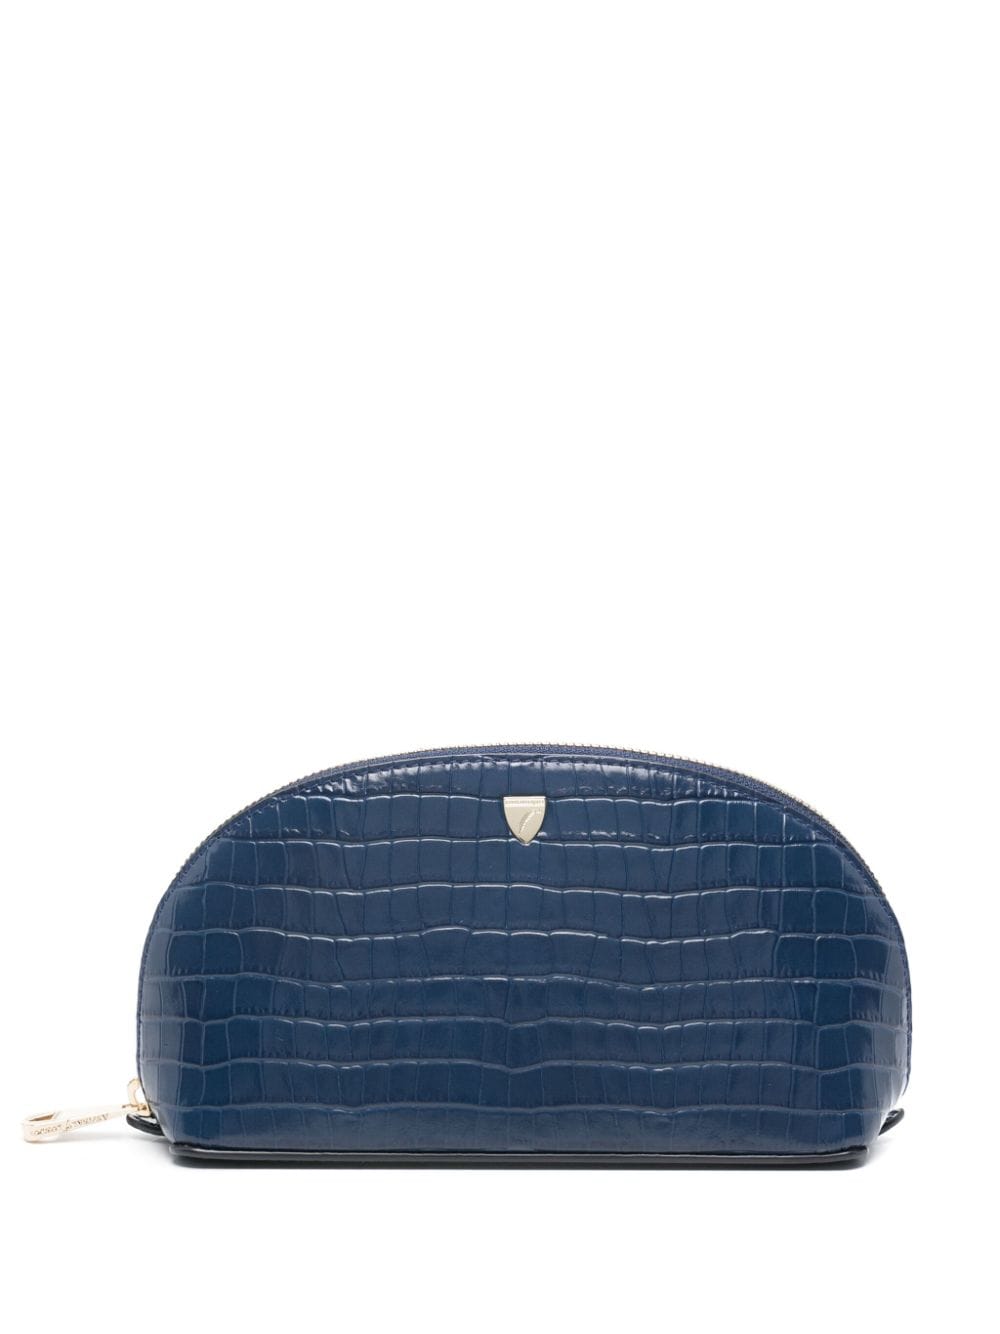 Aspinal Of London small croc-embossed make-up bag - Blue von Aspinal Of London